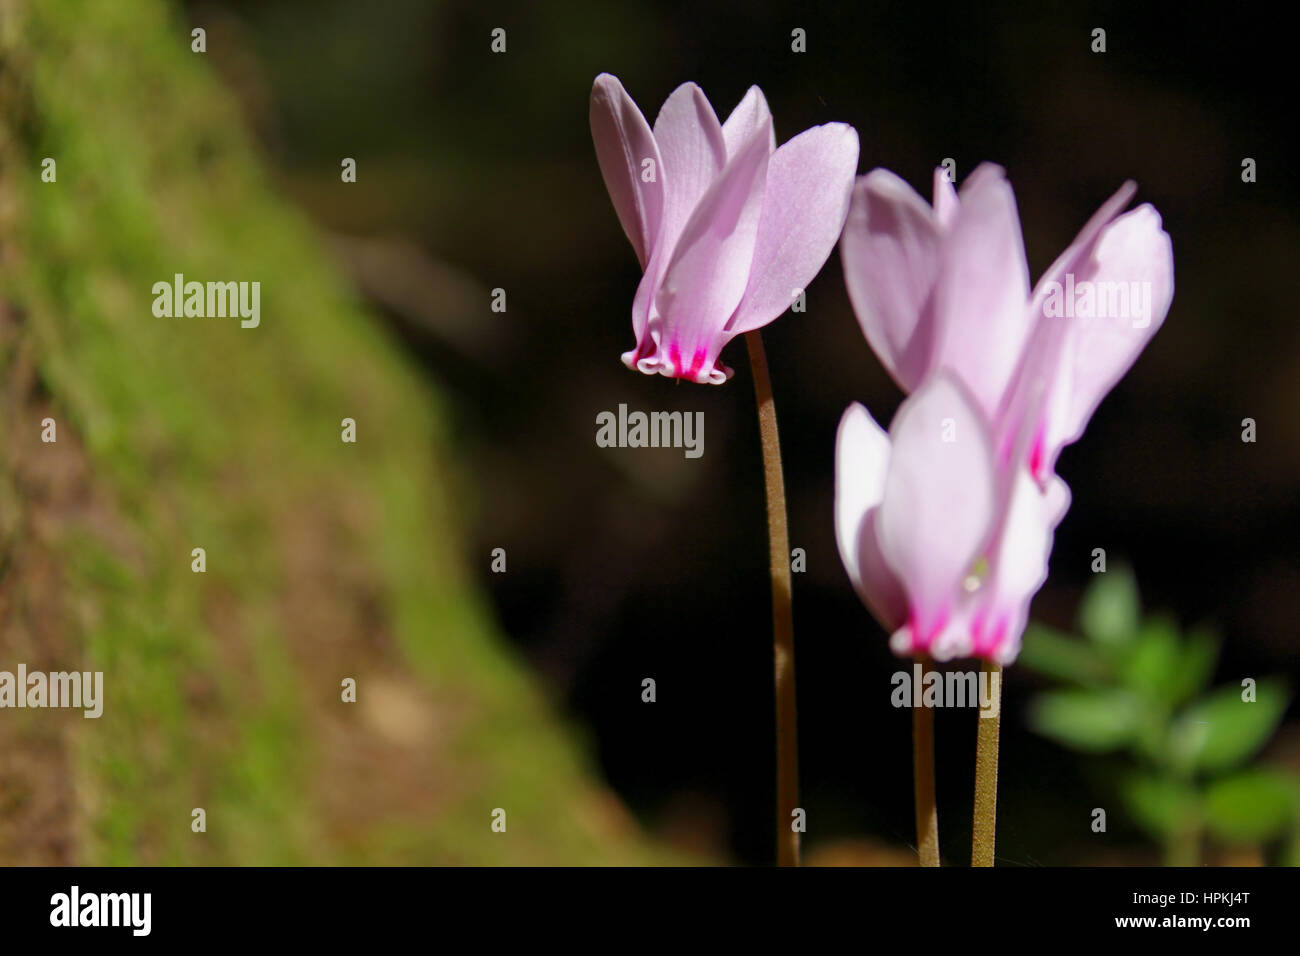 An image of three Cyclamens  (family of Myrsinaceae)  in a woodland scenery Stock Photo